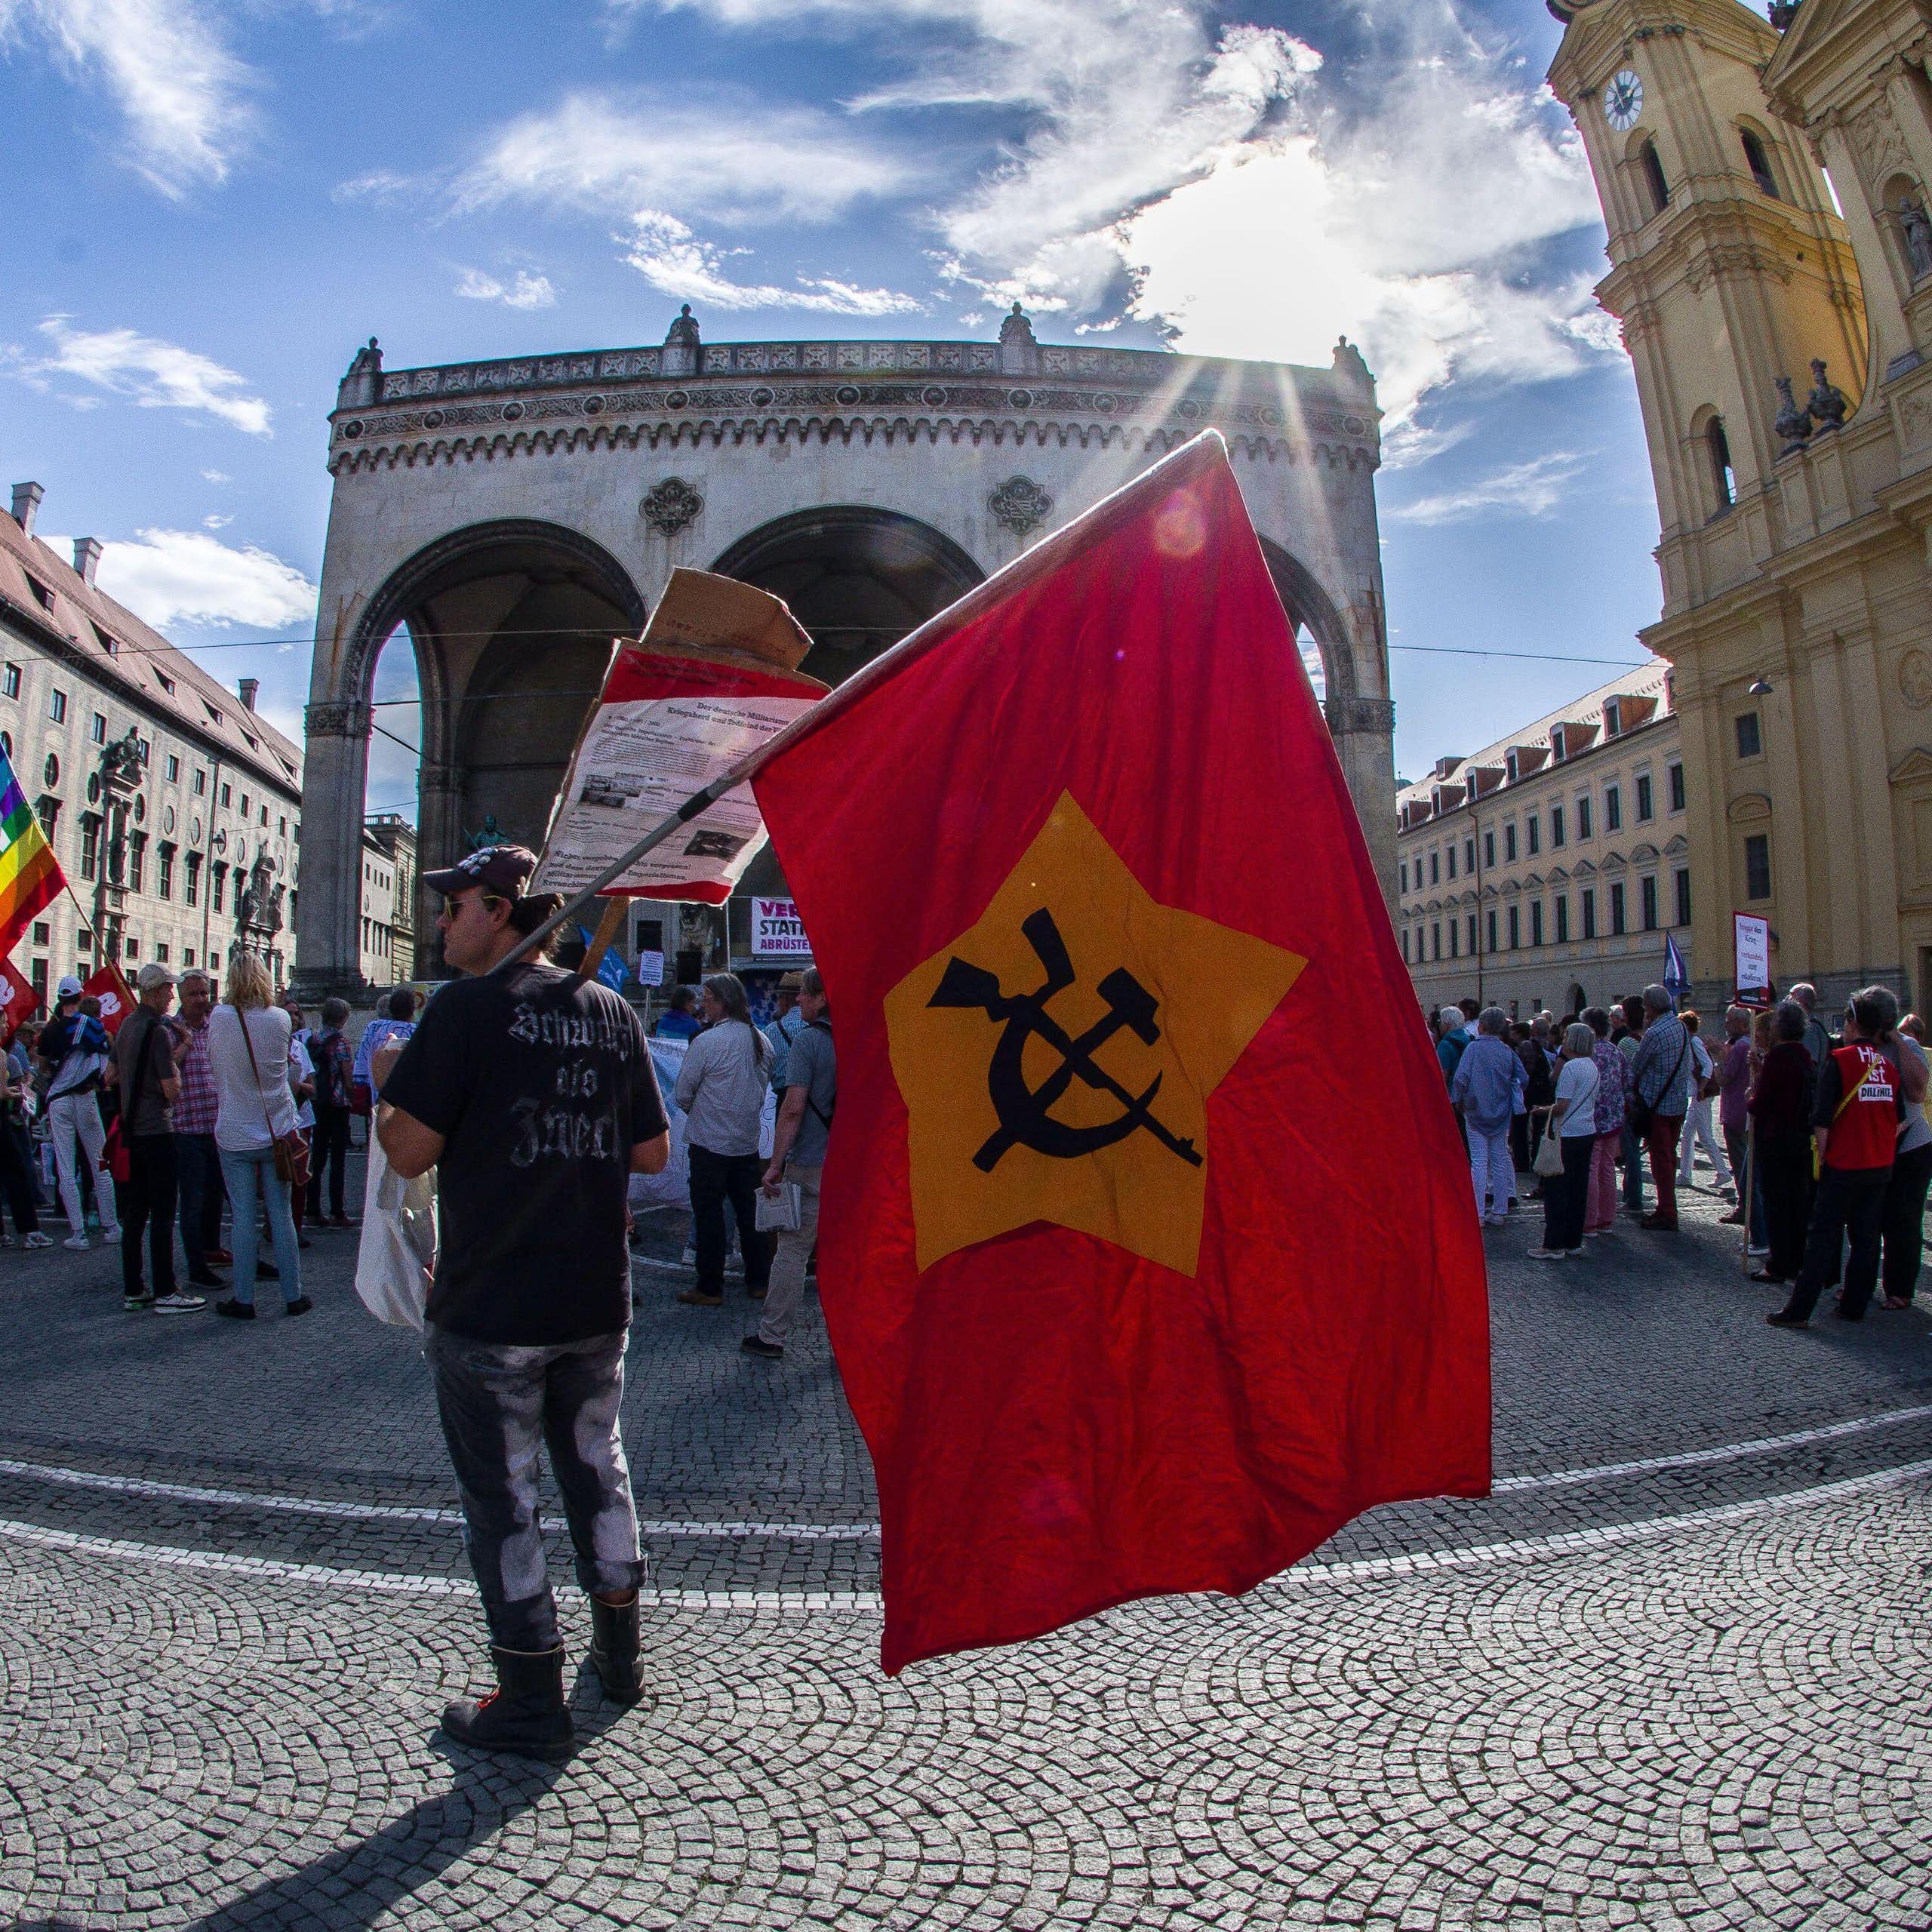 A pro-Russia supporter with a Soviet flag, demonstrates in Germany.